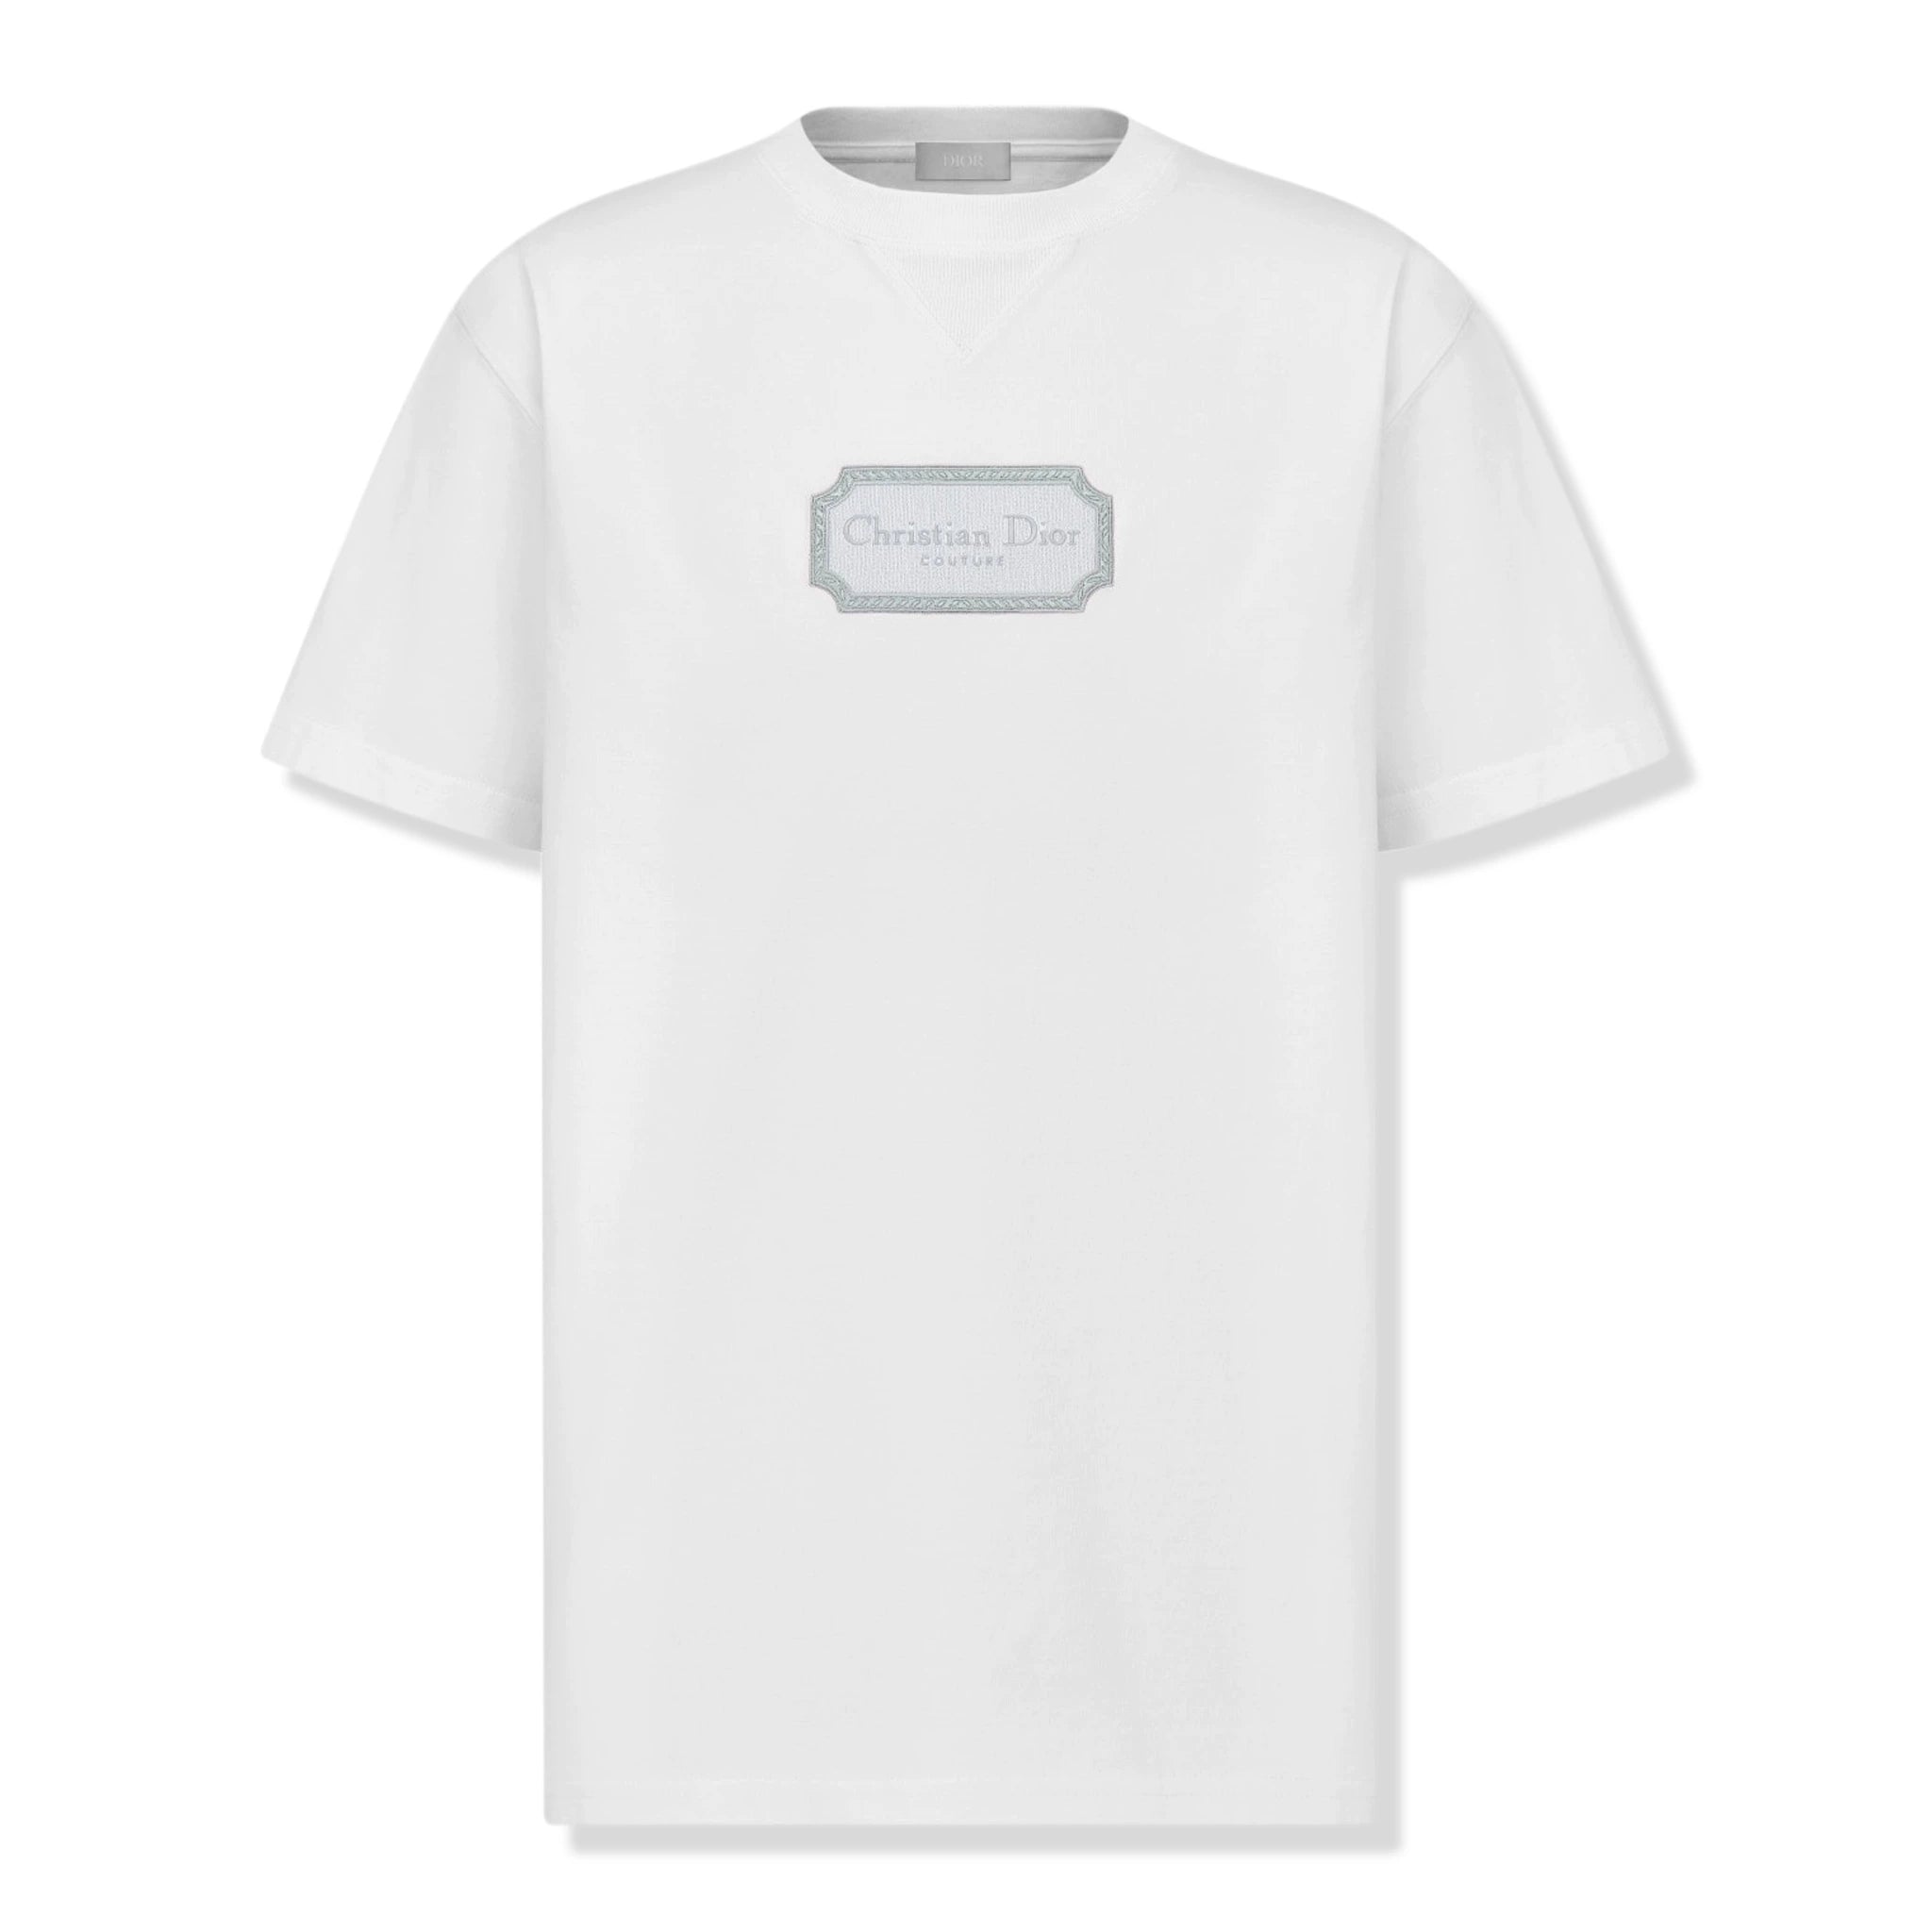 Front view of Dior 'Christian Dior Couture' Relaxed Fit White T Shirt 343J696C0554_C088